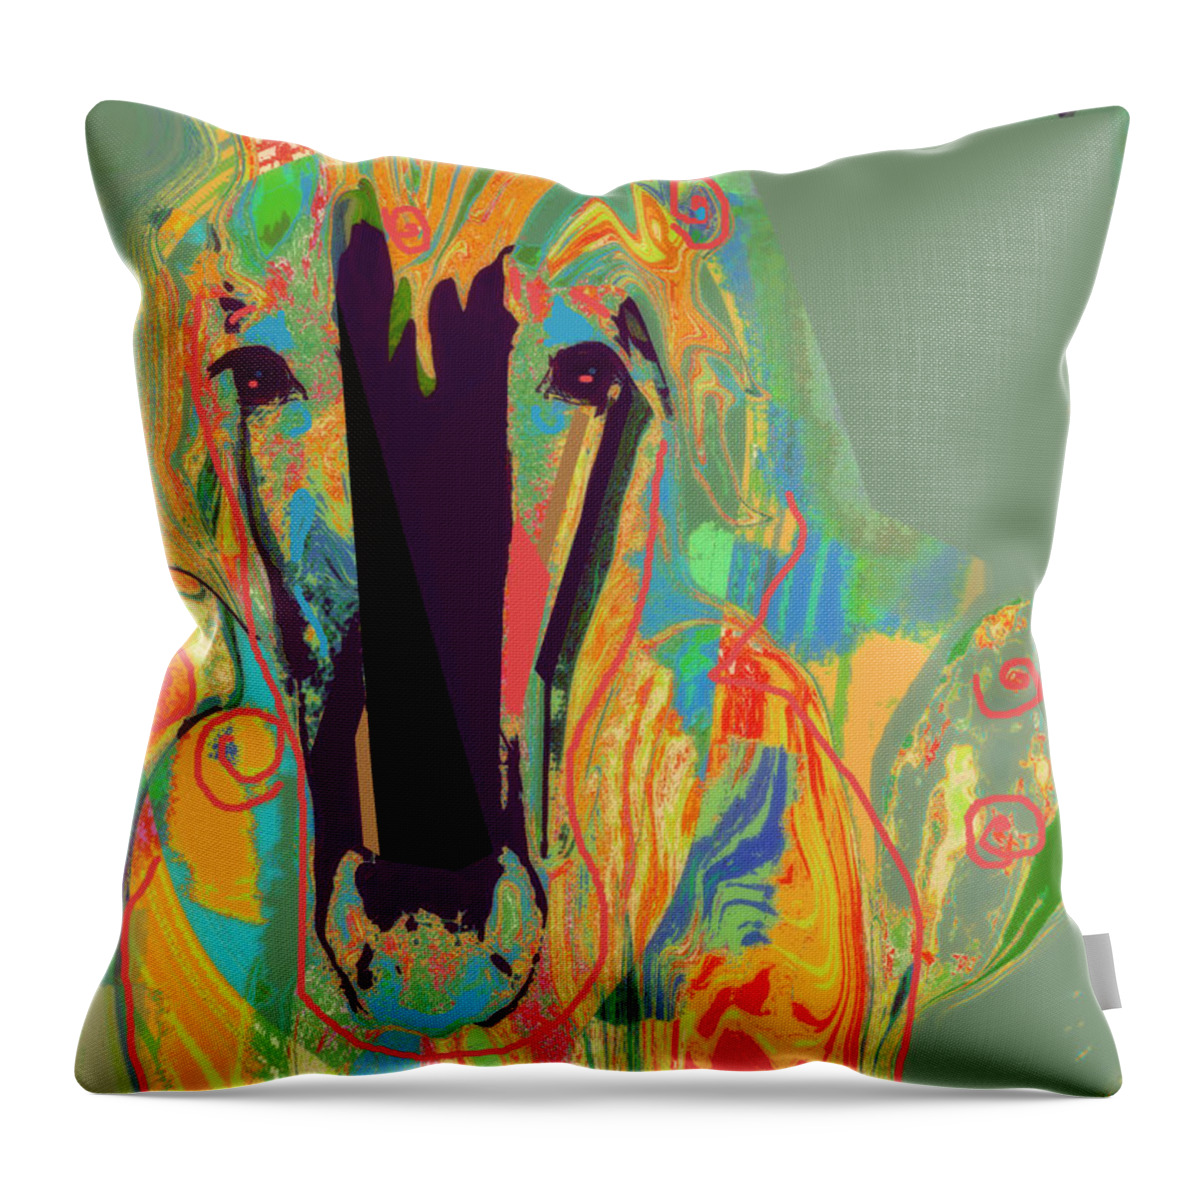 Lungta Throw Pillow featuring the mixed media Lungta Windhorse No 6 by Zsanan Studio